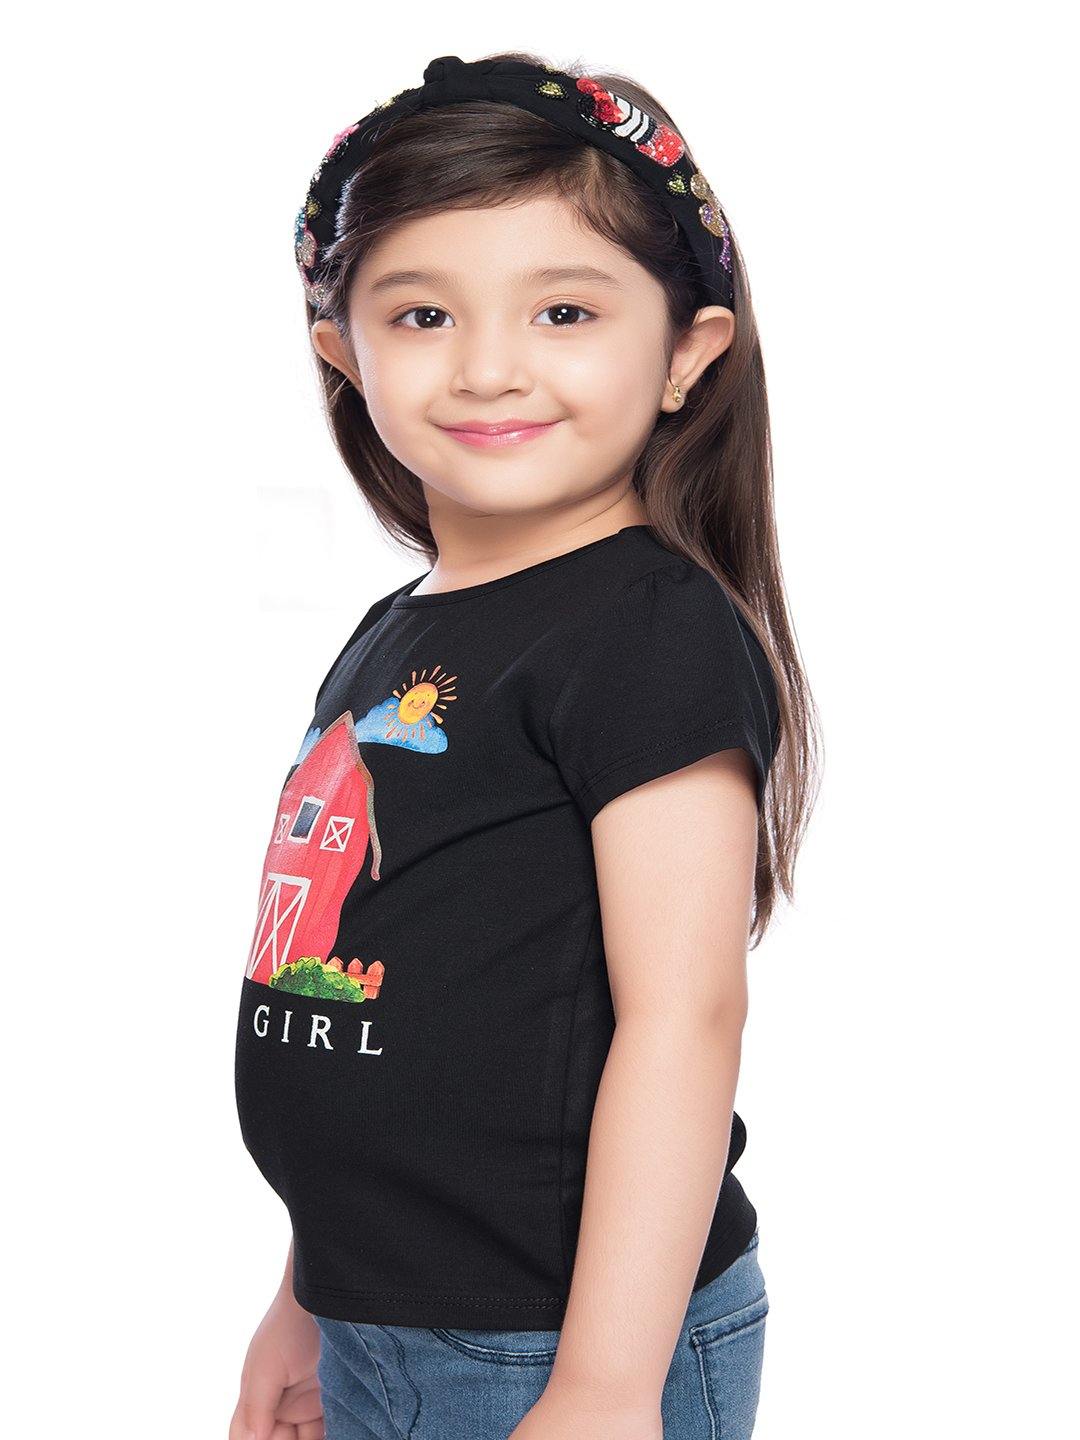 Tiny Baby Black Colored Top - T-106 Black - TINY BABY INDIA shop.tinybaby.in